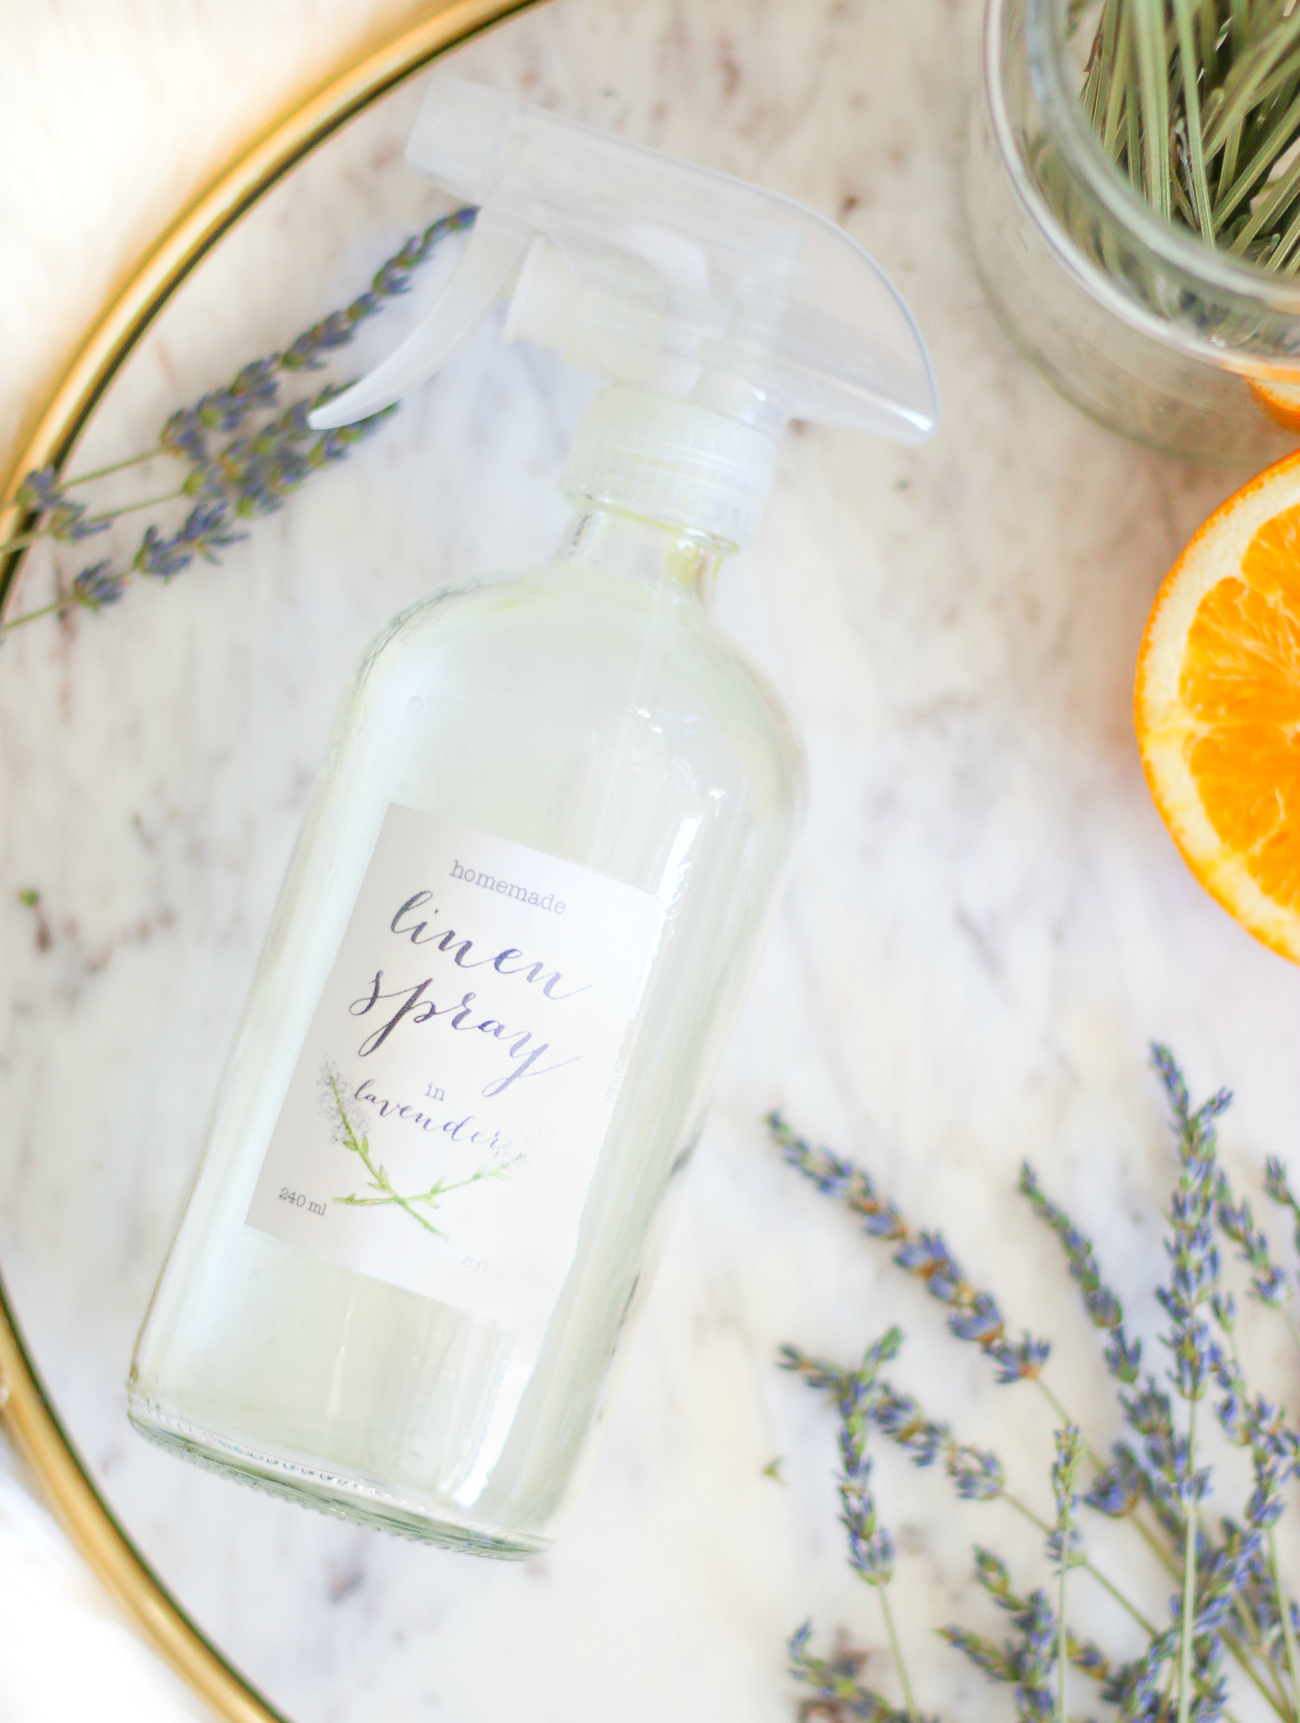 DIY essential oil linen spray by southern fashion blogger Stephanie Ziajka from Diary of a Debutante, DIY laundry spray with lavender, sweet orange, and tea tree oil from Thursday Plantation